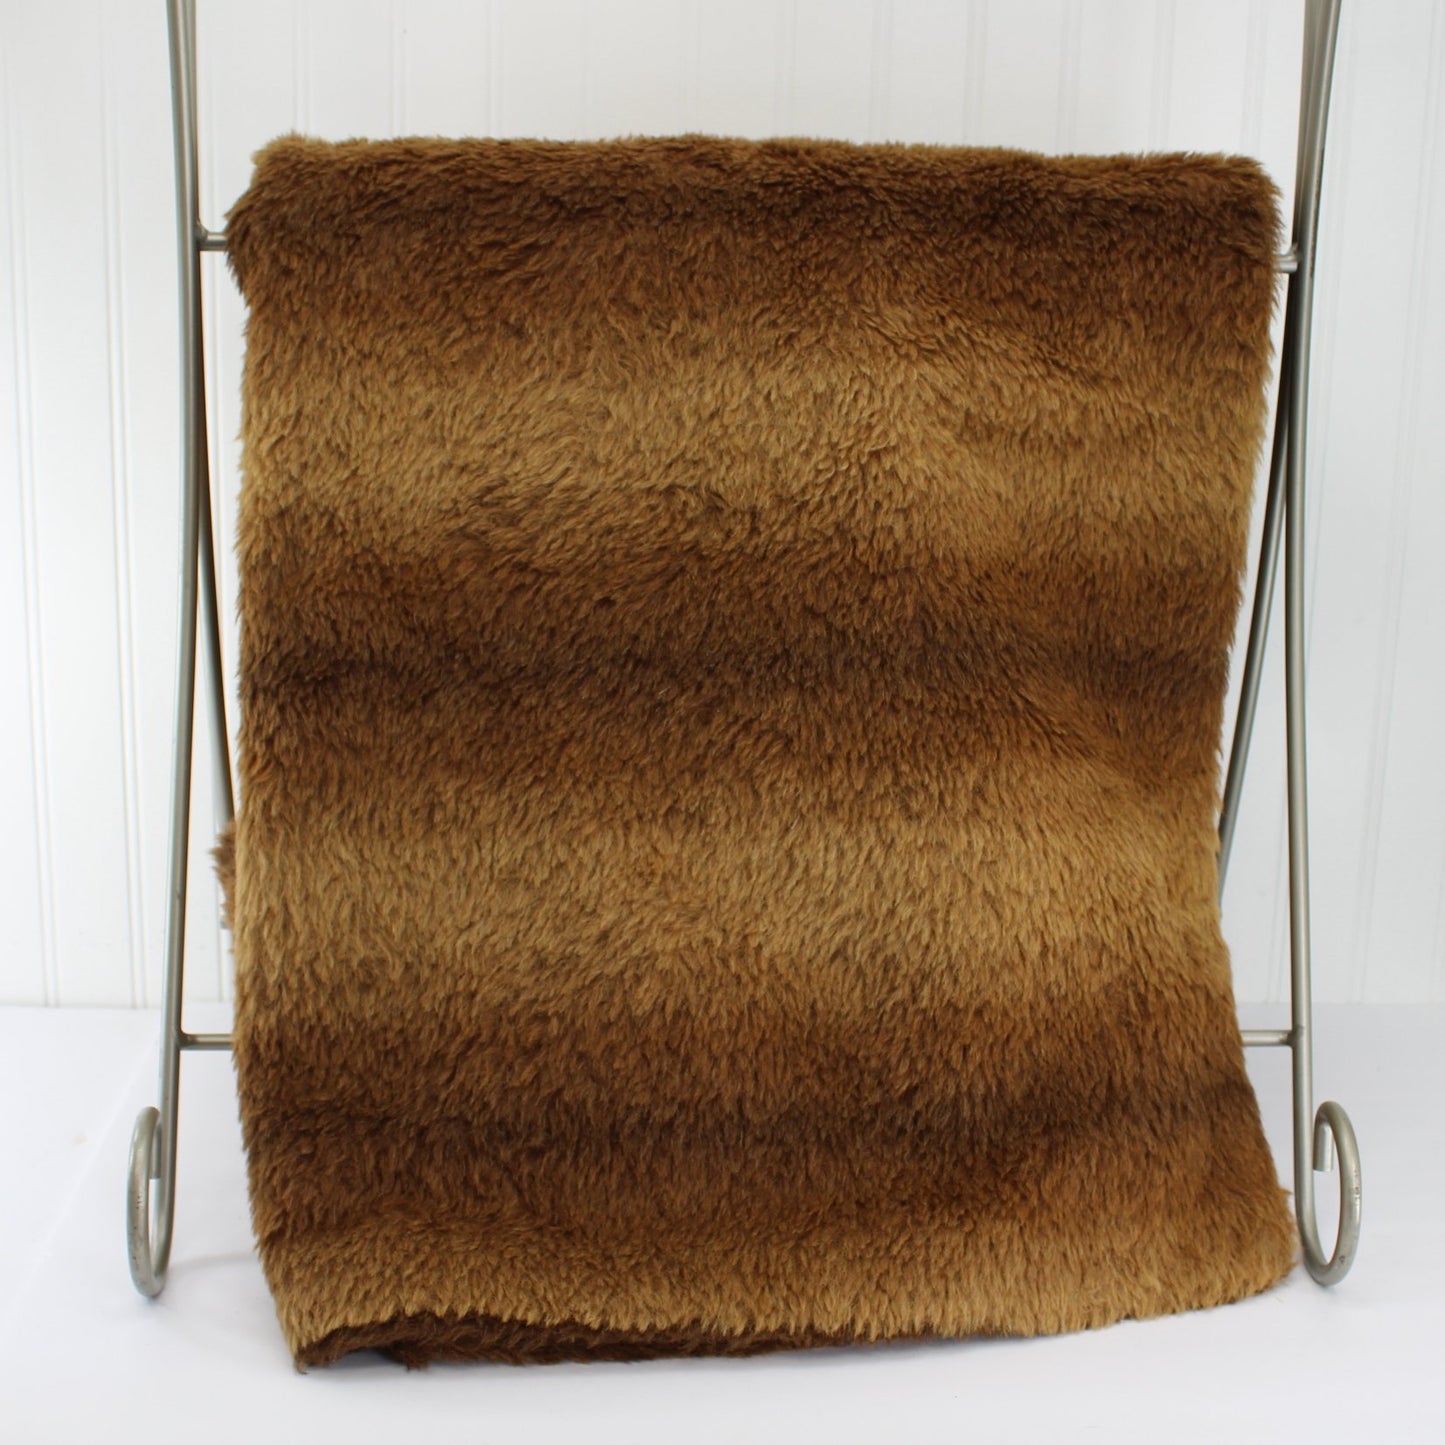 Antique Alpaca Wool Blanket Abercrombie Fitch Handsome Shades Brown heavy nap double fur